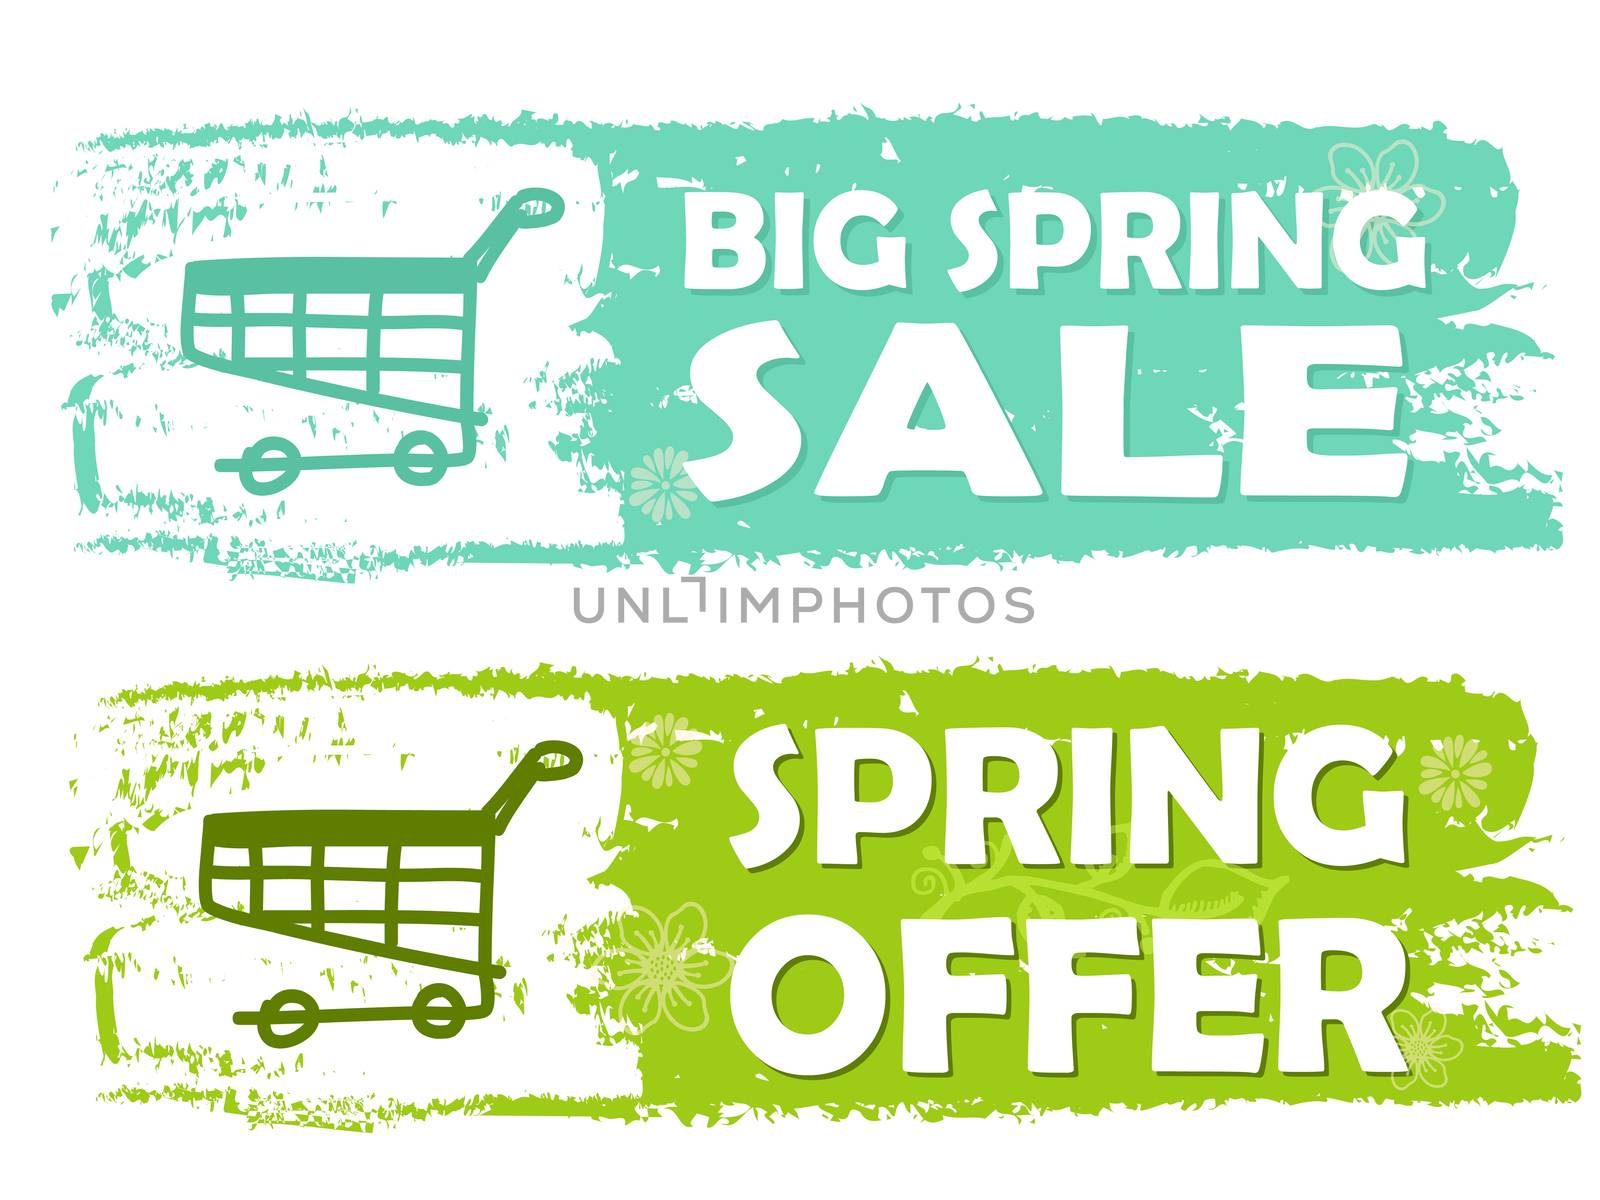 big spring sale and offer with shopping cart signs banners - text and symbols in green drawn labels, business shopping seasonal concept